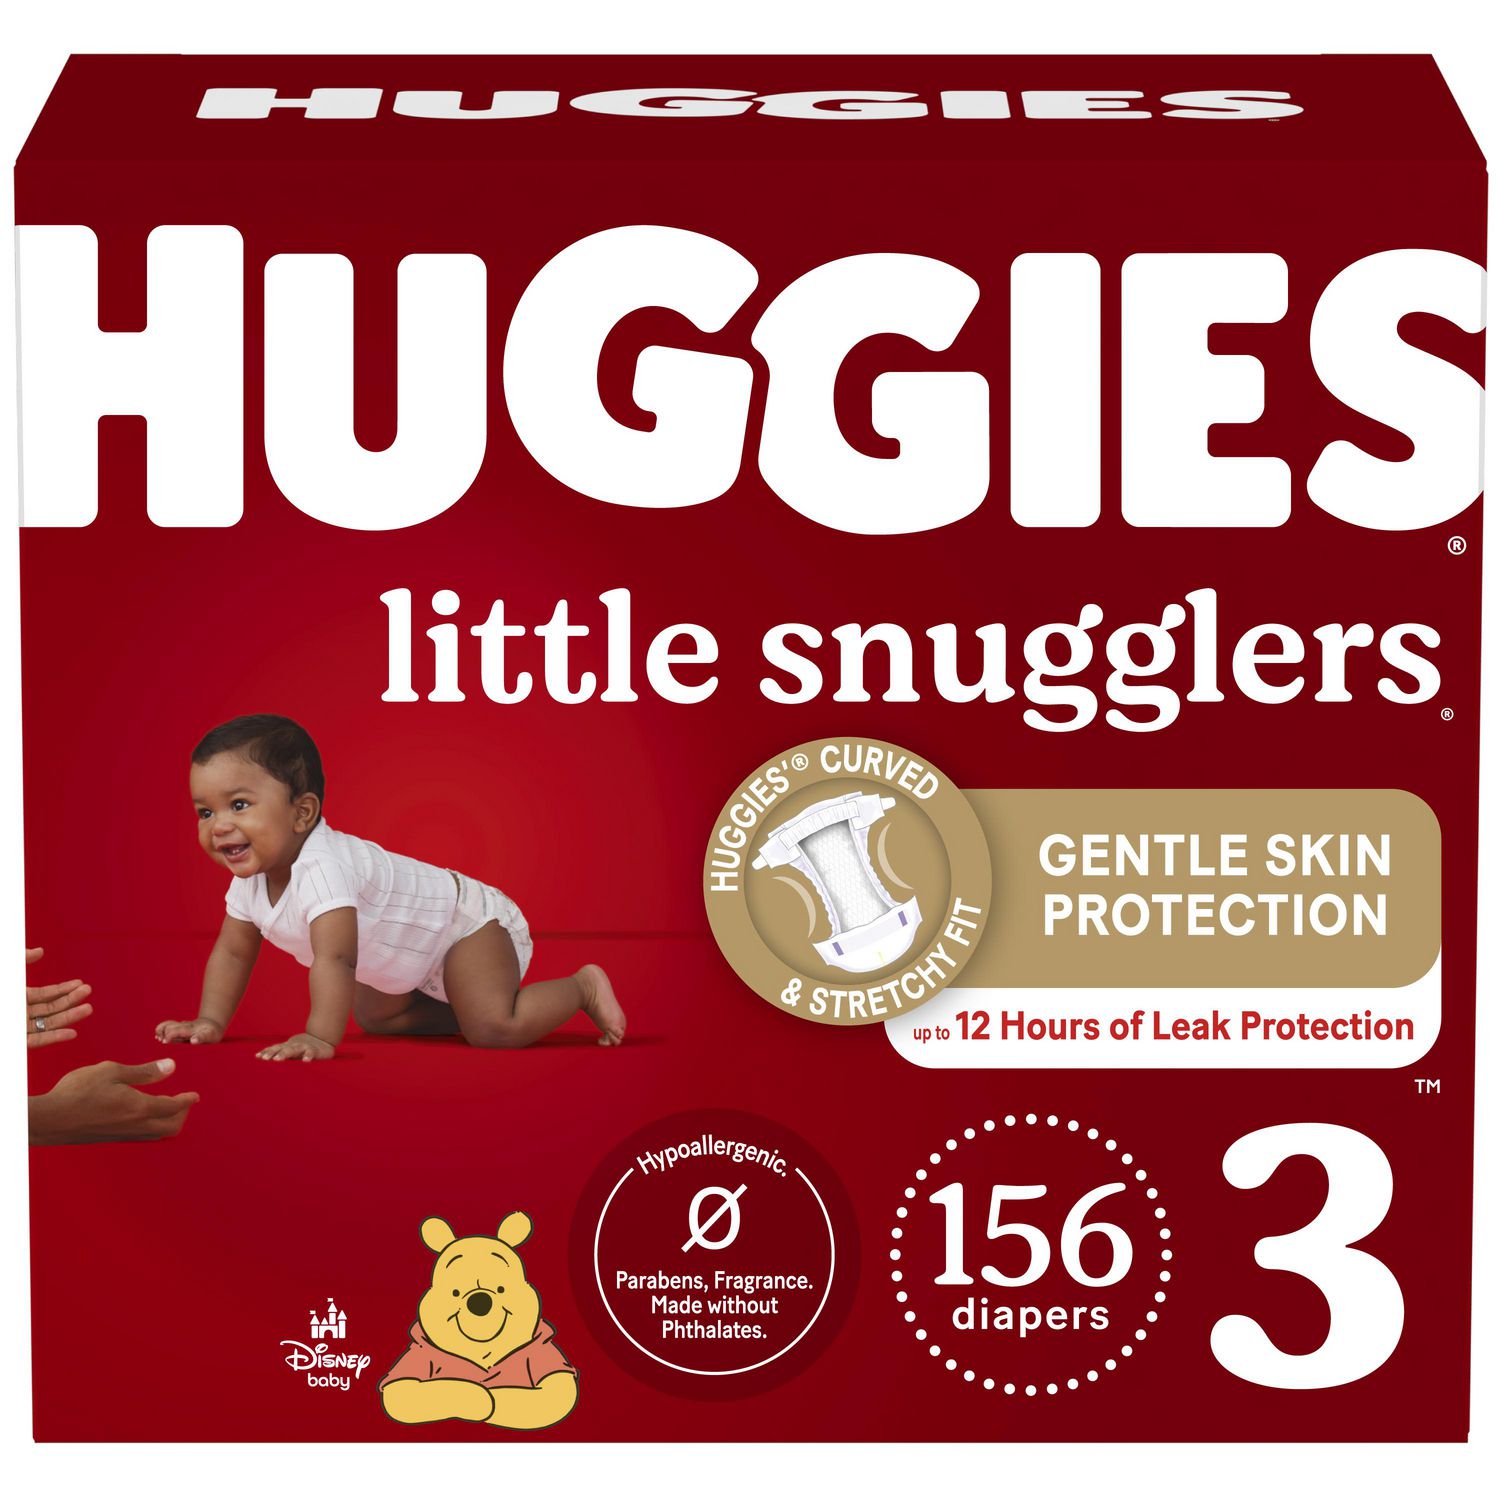 HUGGIES　Pack,　198-96　Count　Sizes:　Little　Econo　Diapers,　Snugglers　1-6